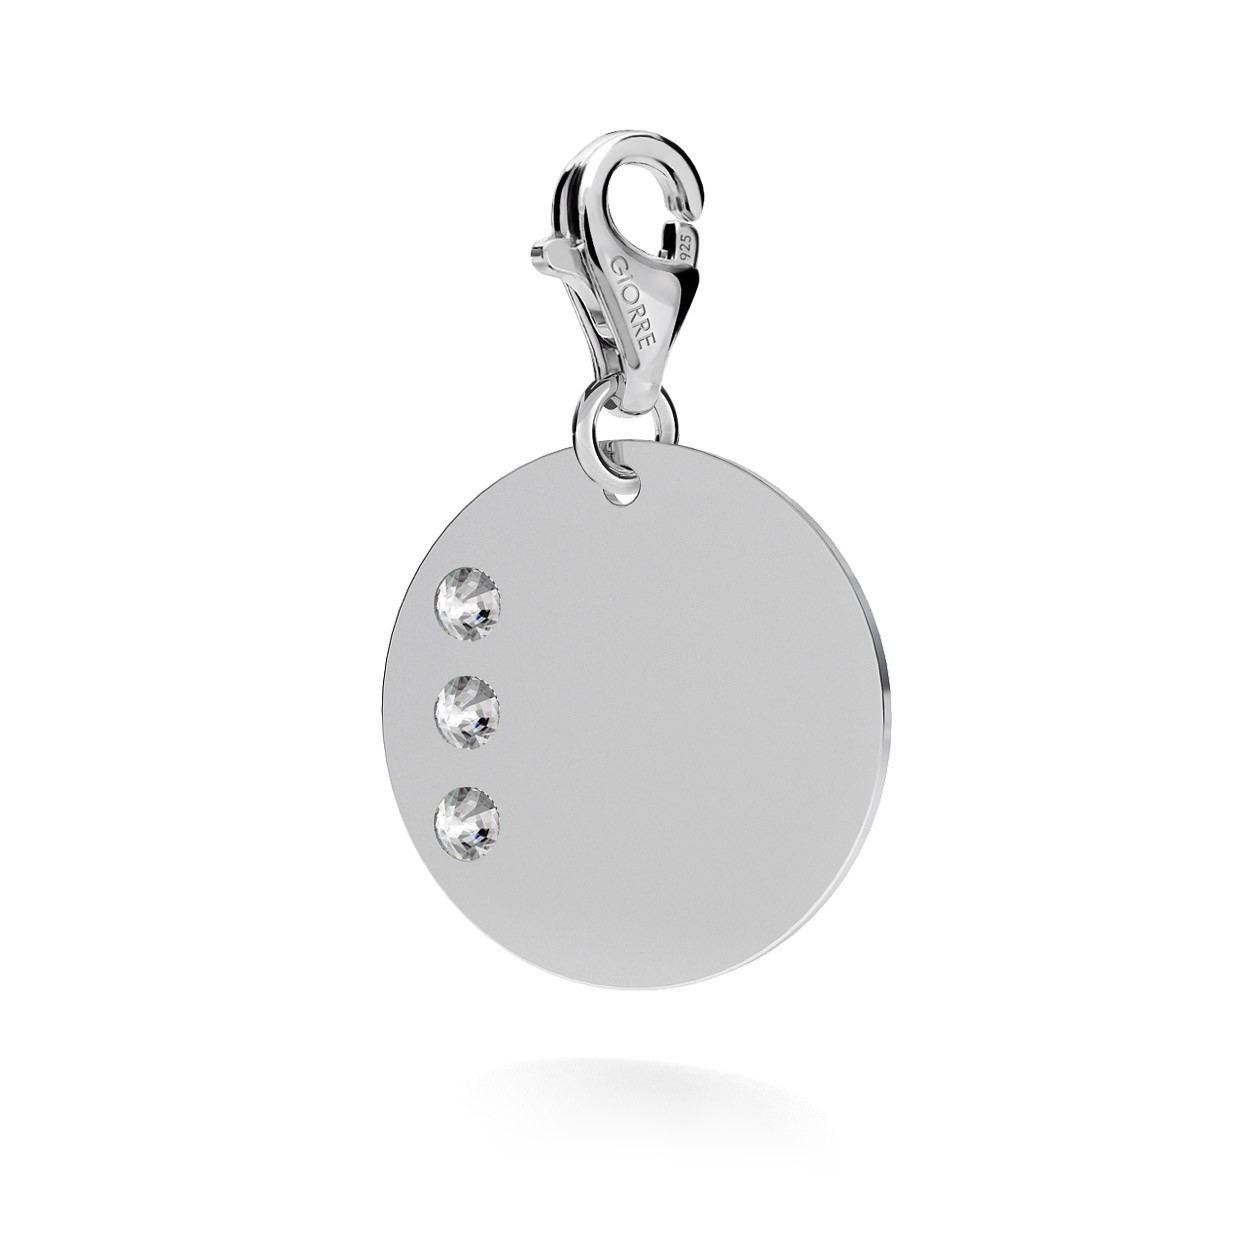 CHARM 131, ROUND DISC NAME WITH ENGRAVE, SWAROVSKI 2038 SS 6, STERLING SILVER (925) RHODIUM OR GOLD PLATE